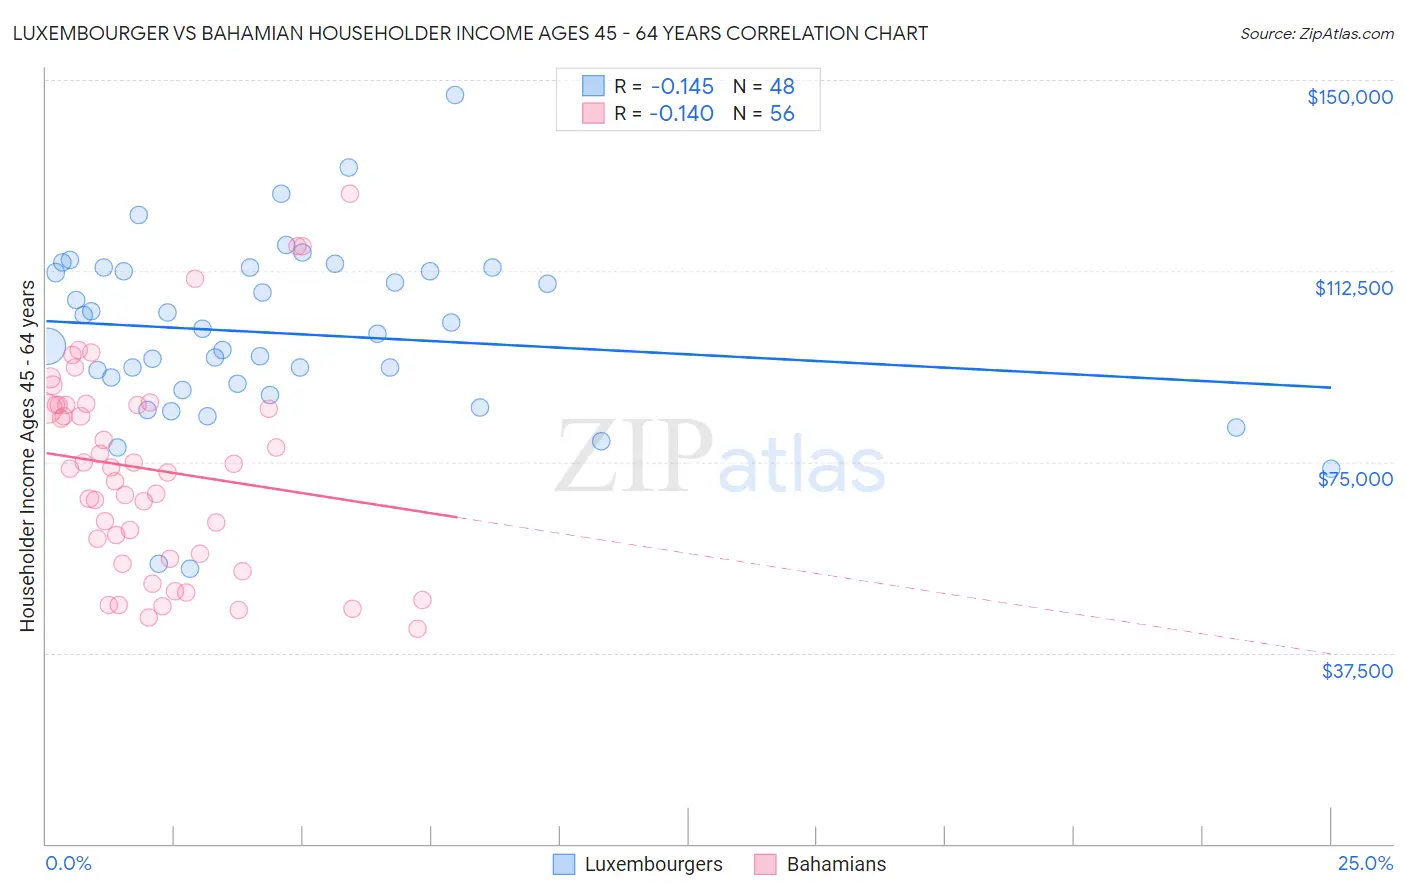 Luxembourger vs Bahamian Householder Income Ages 45 - 64 years